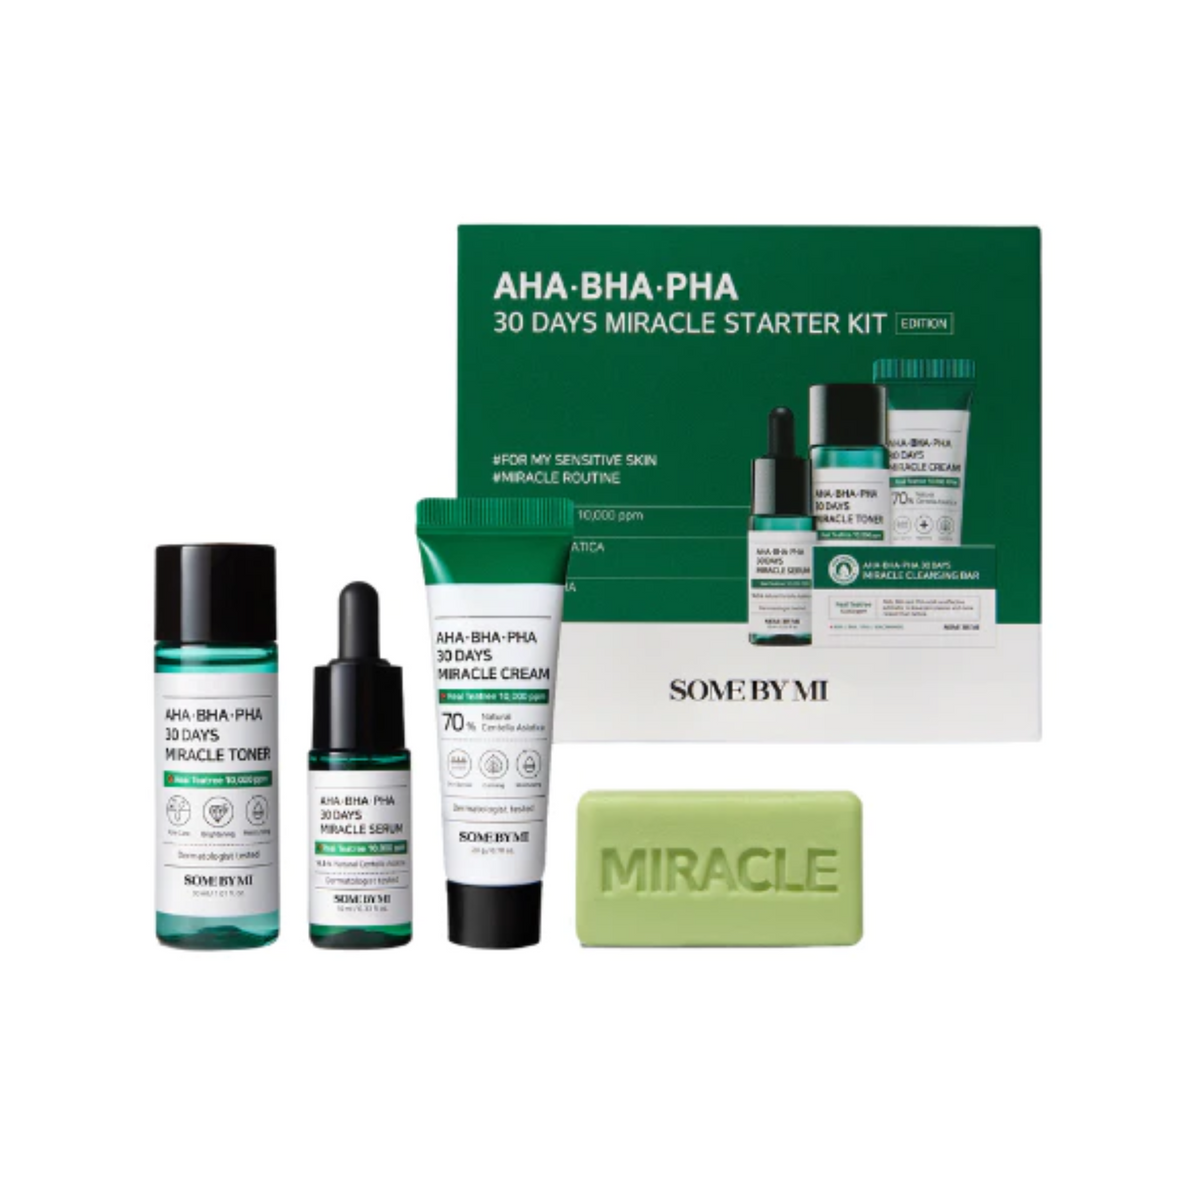 SOME BY MI AHA-BHA-PHA 30 Days Miracle Starter Kit (4 items)